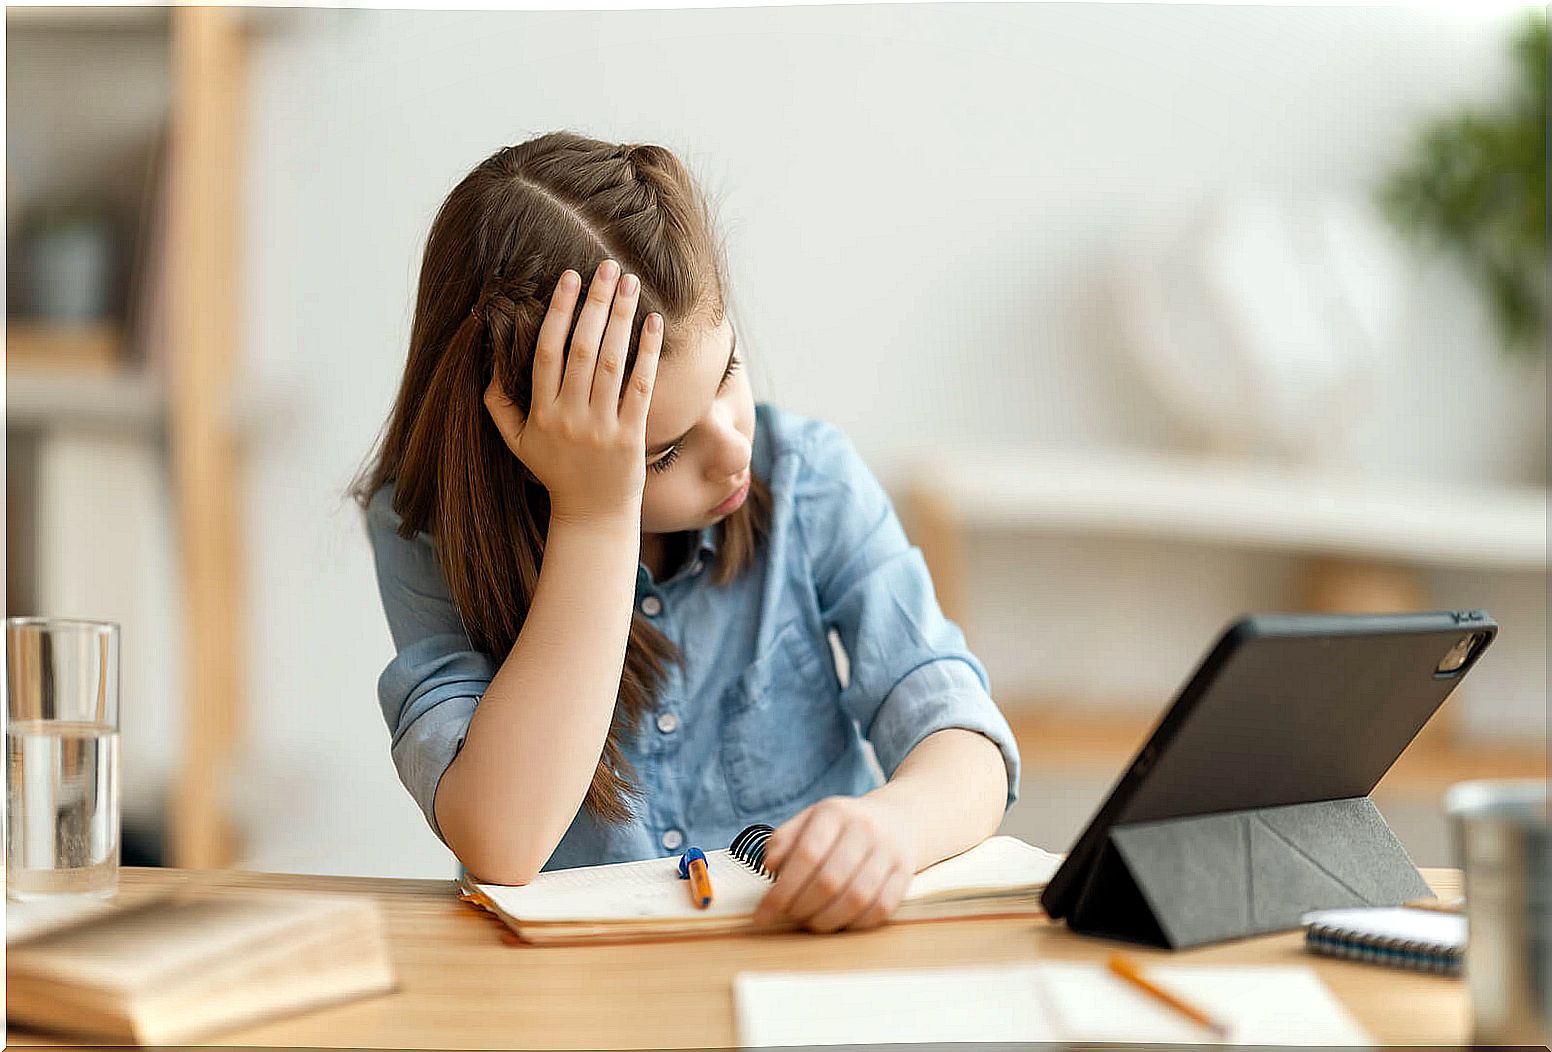 Girl doing homework frustrated by her excessive perfectionism.